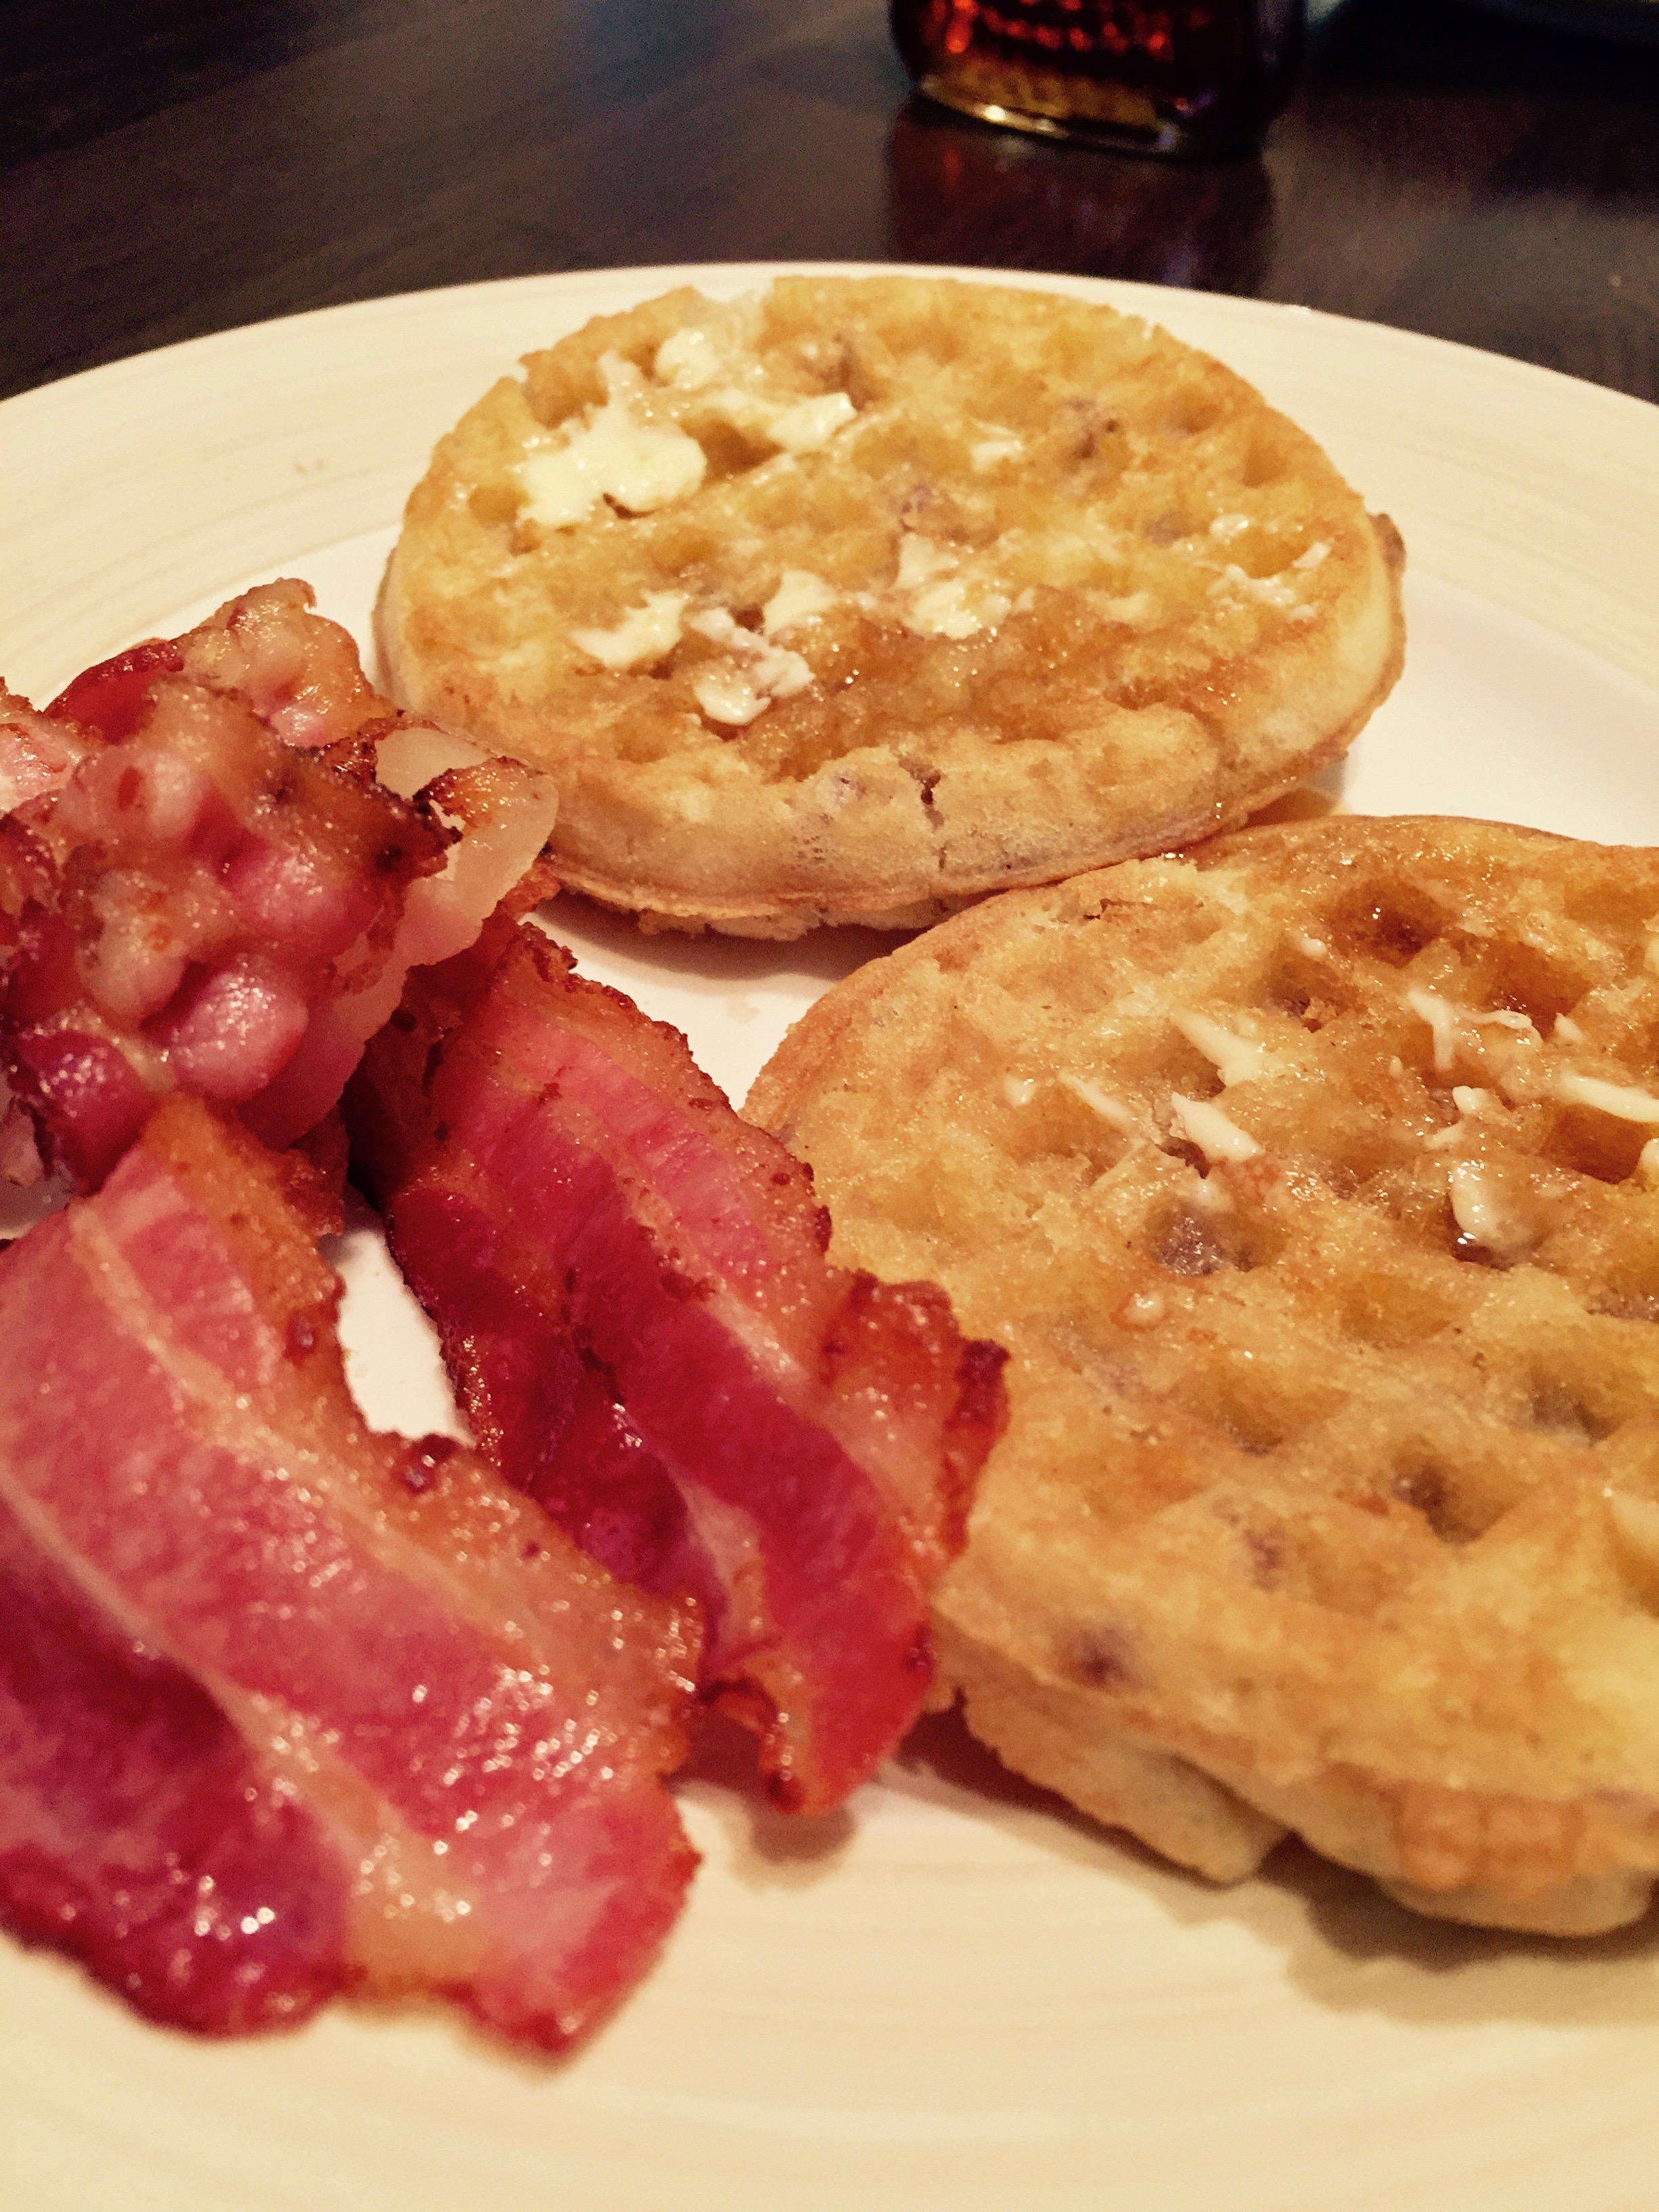 Waffles and bacon